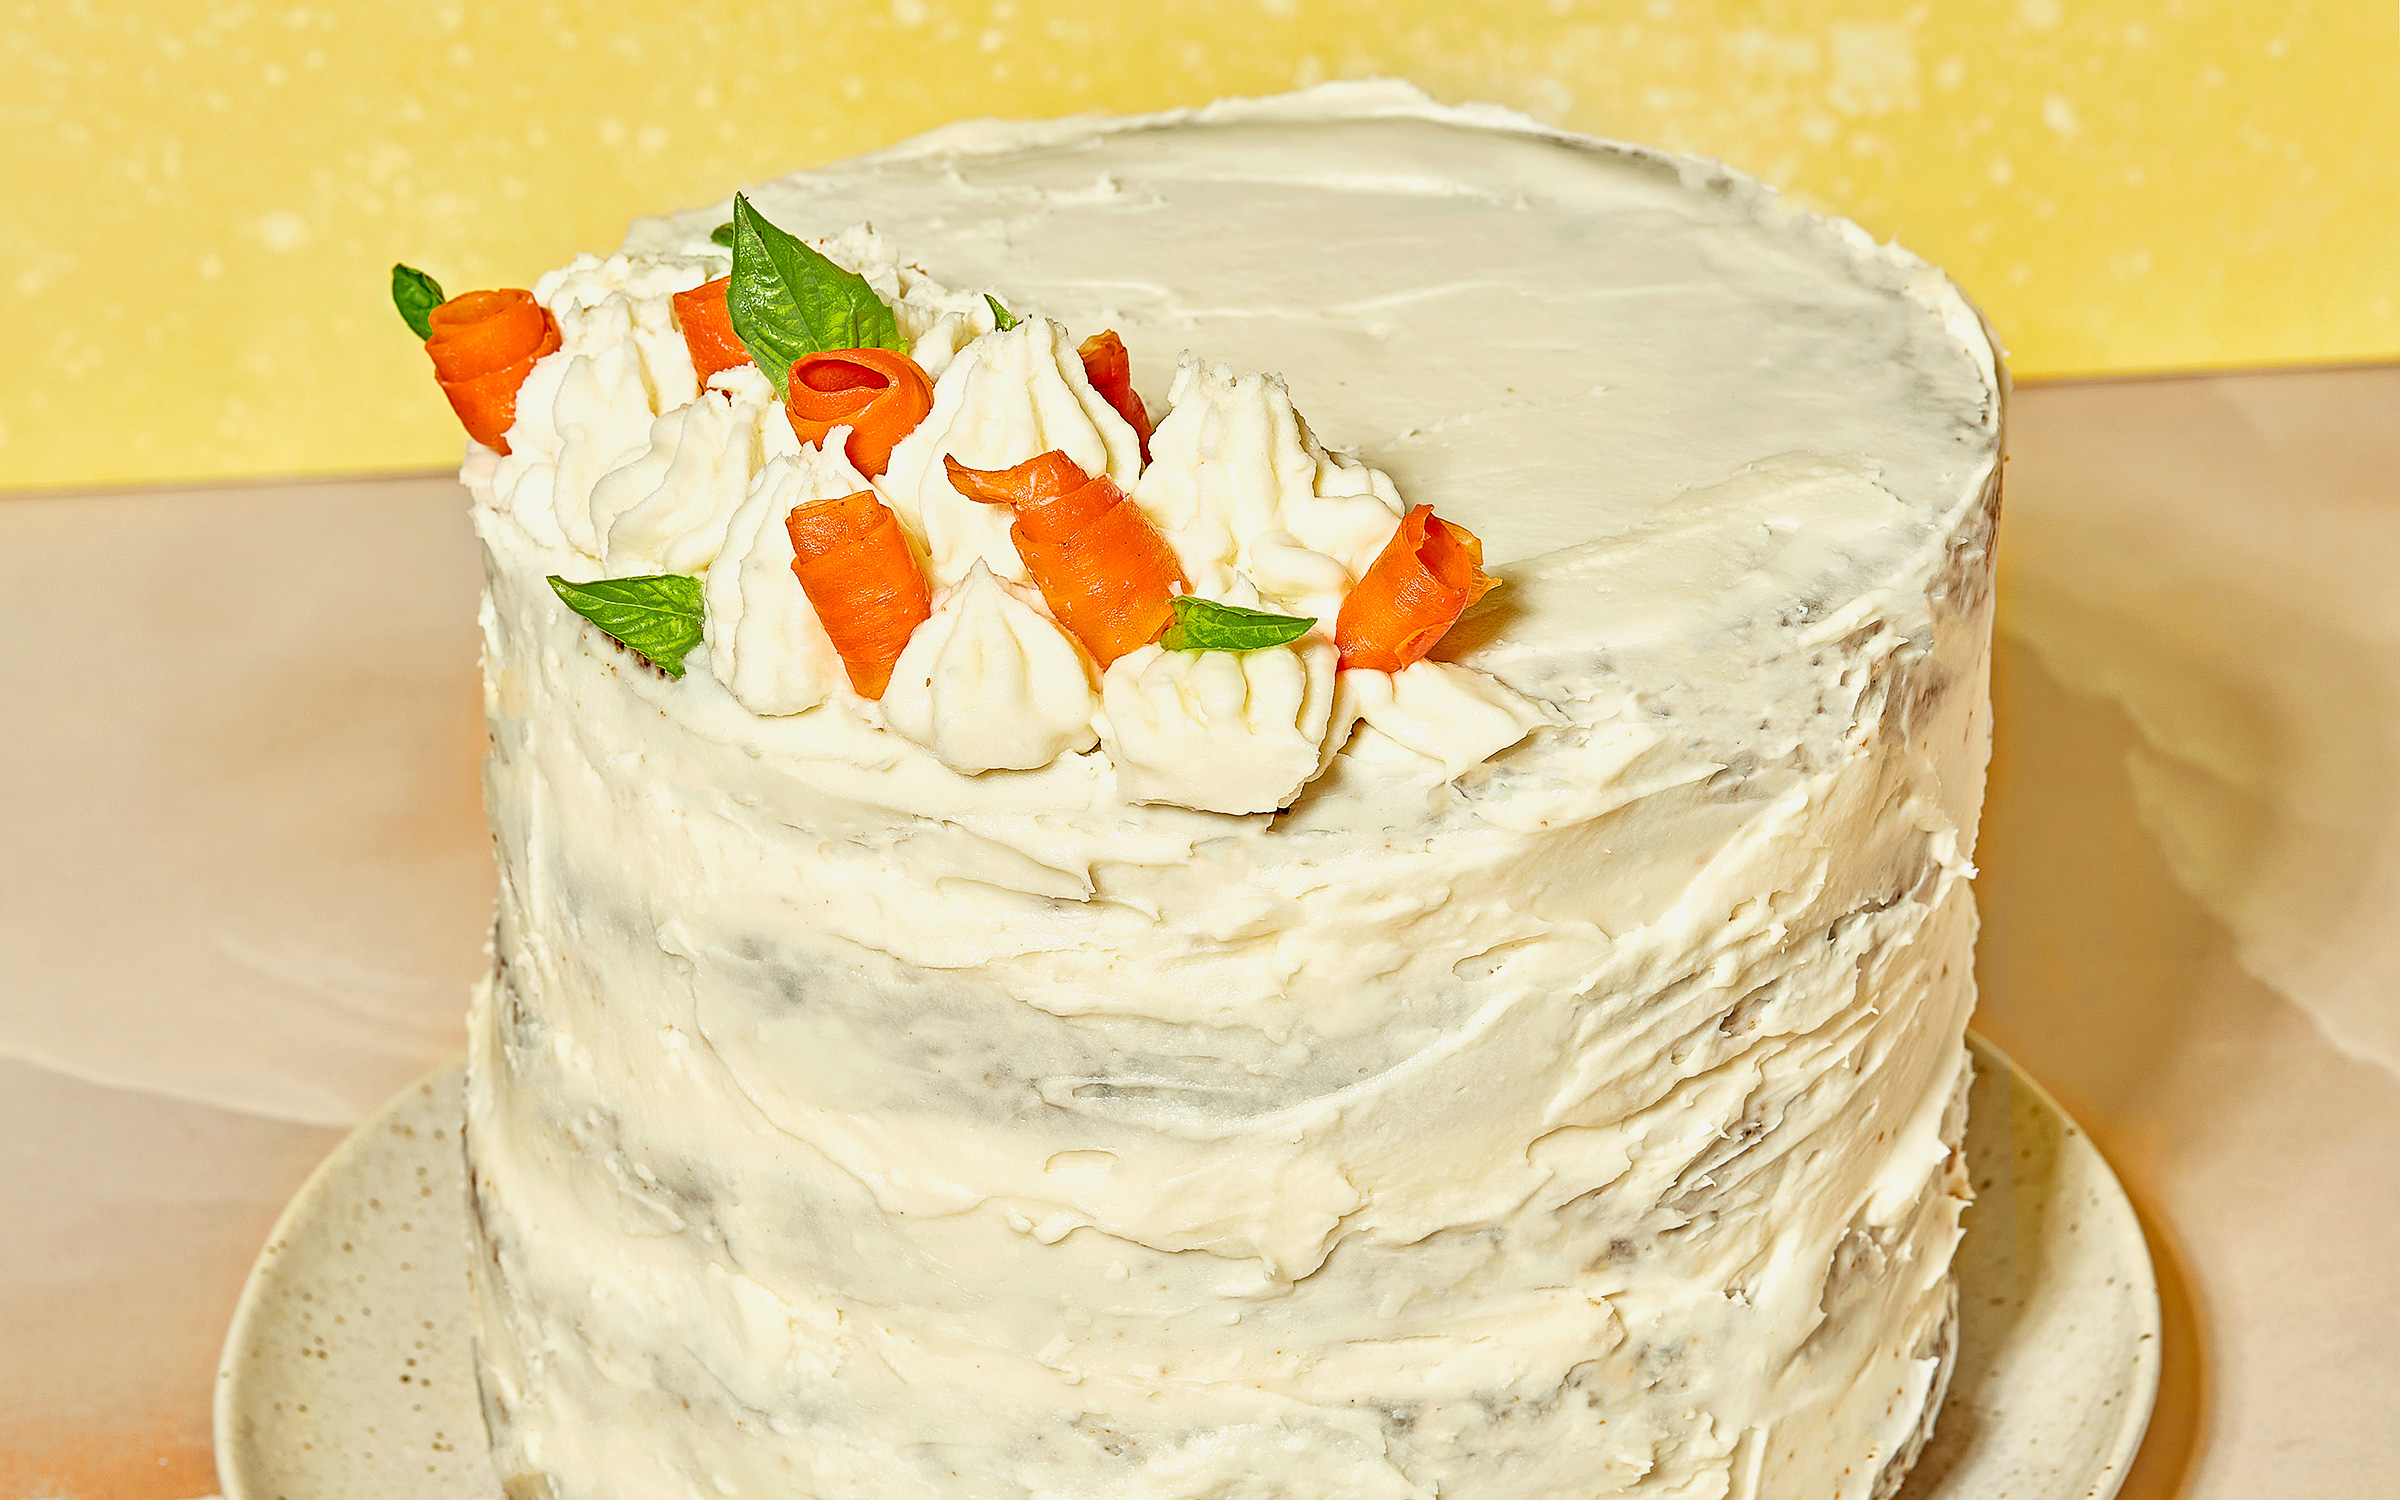 Buy our happy birthday carrot cake at broadwaybasketeers.com